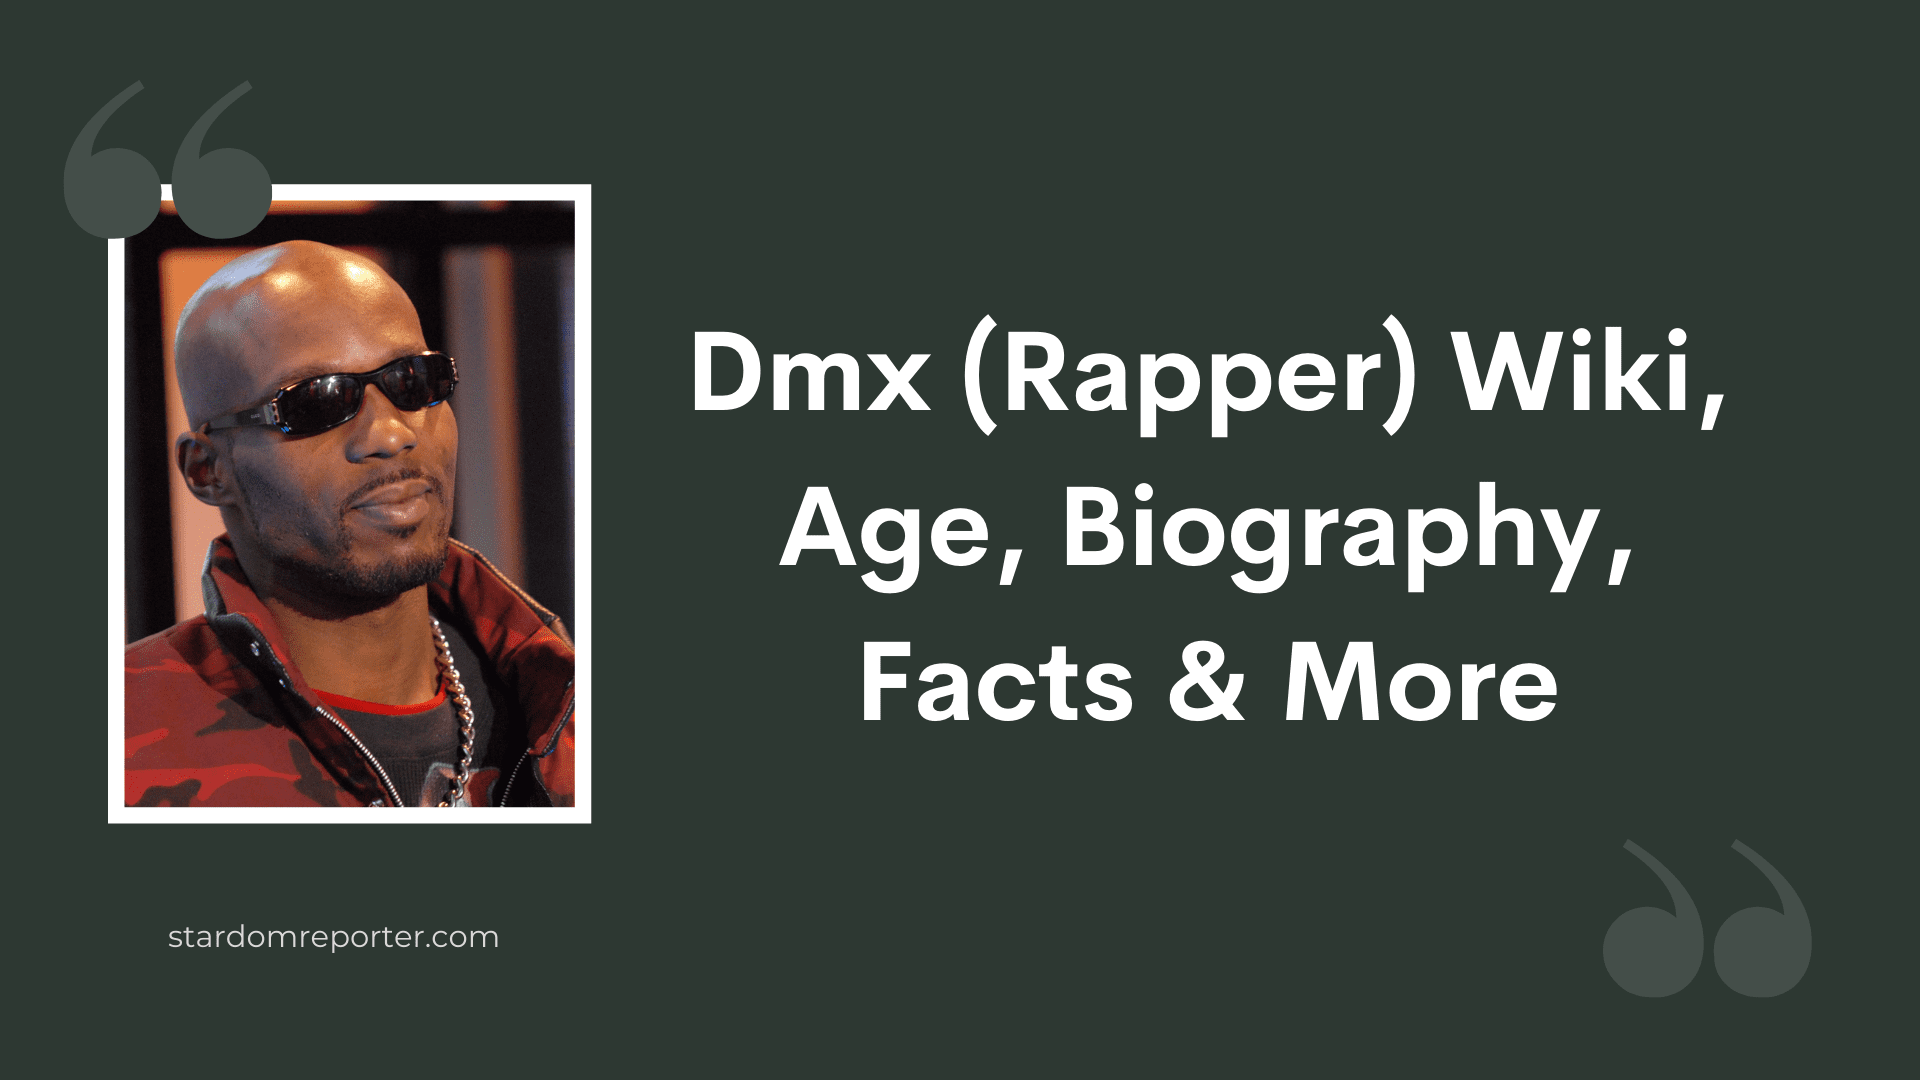 DMX (Rapper) Wiki, Age, Biography, Facts & More - 1